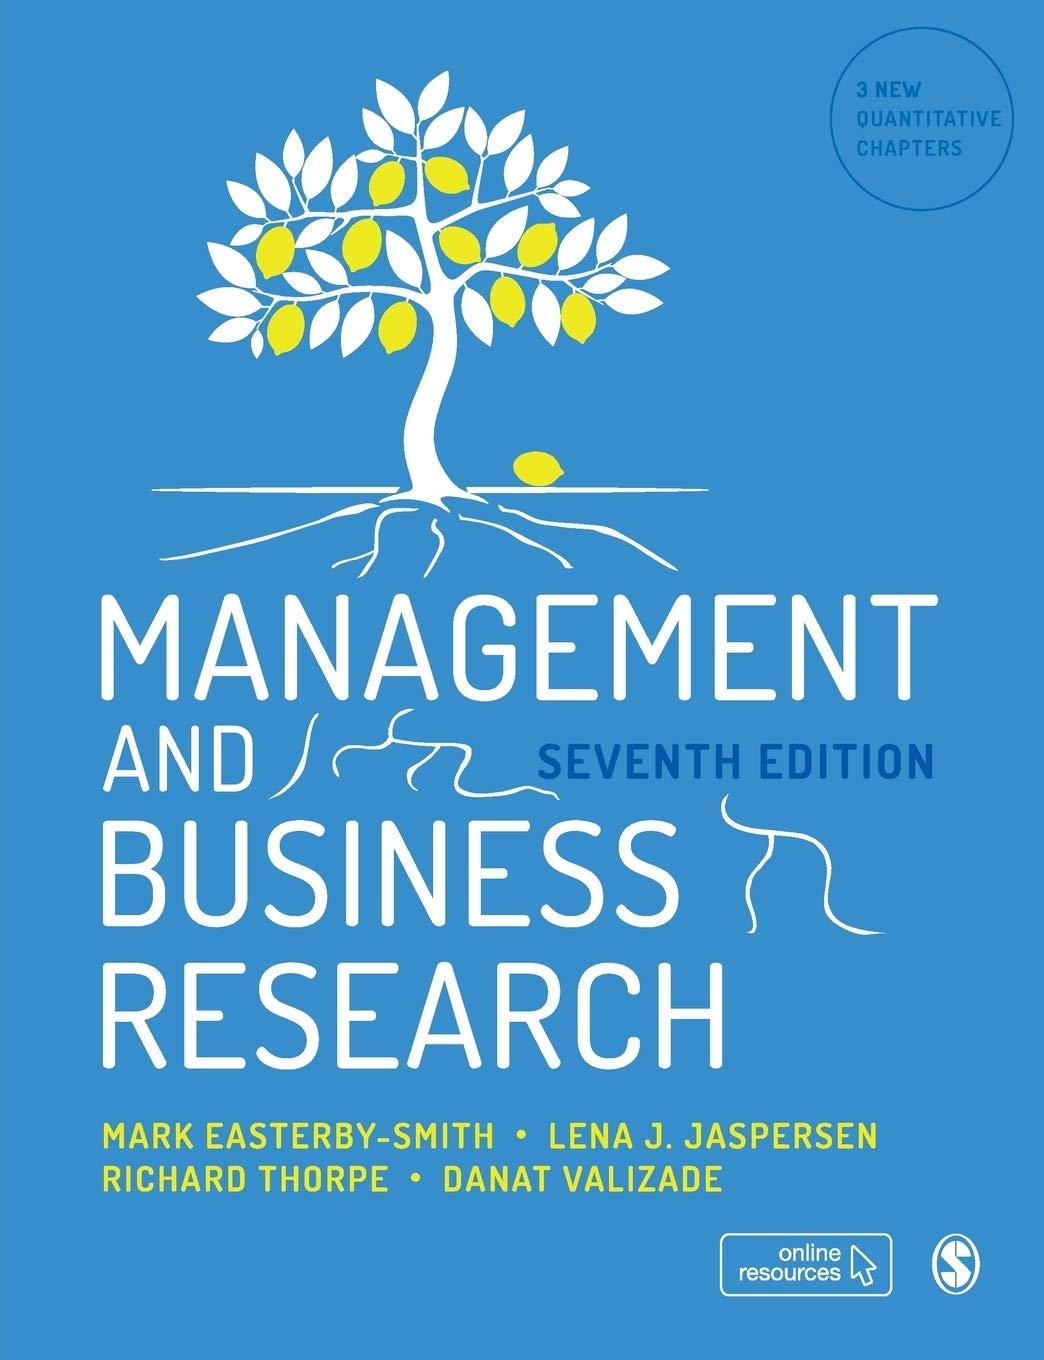 management and business research 7th edition mark easterby-smith, lena j. jaspersen, richard thorpe, danat